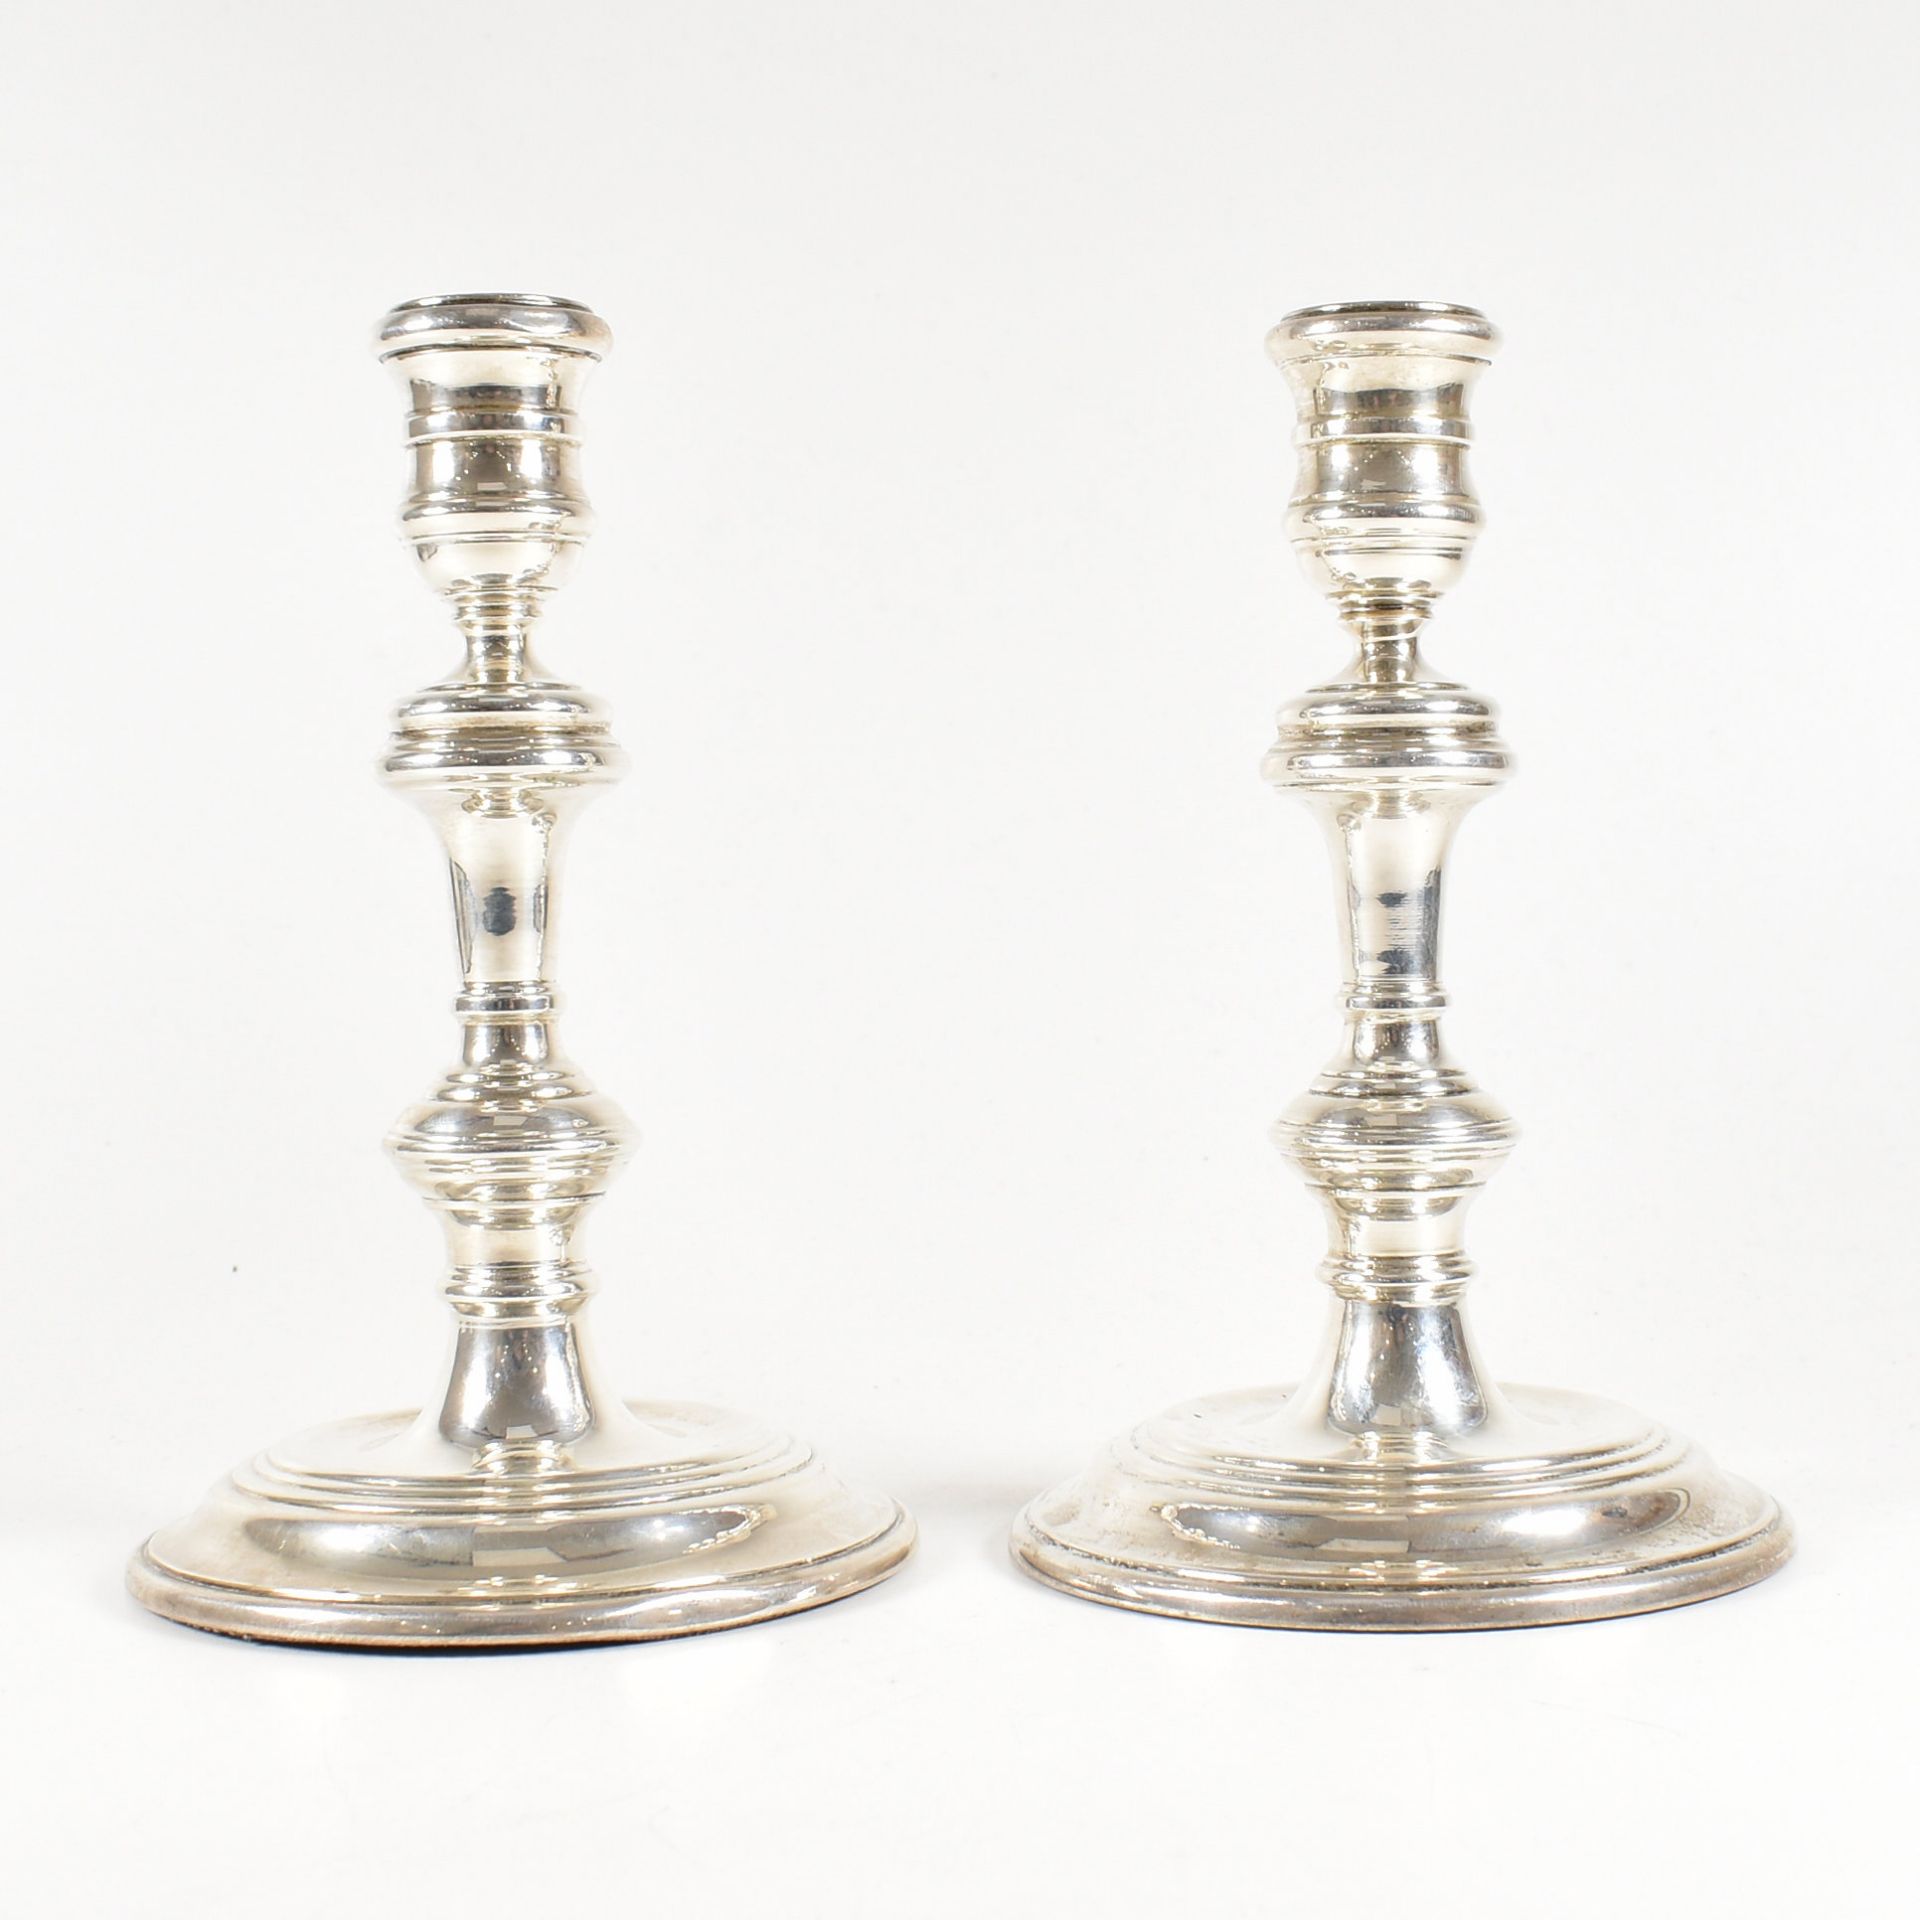 MATCHED PAIR OF MID CENTURY HALLMARKED SILVER CANDLESTICKS - Image 2 of 6